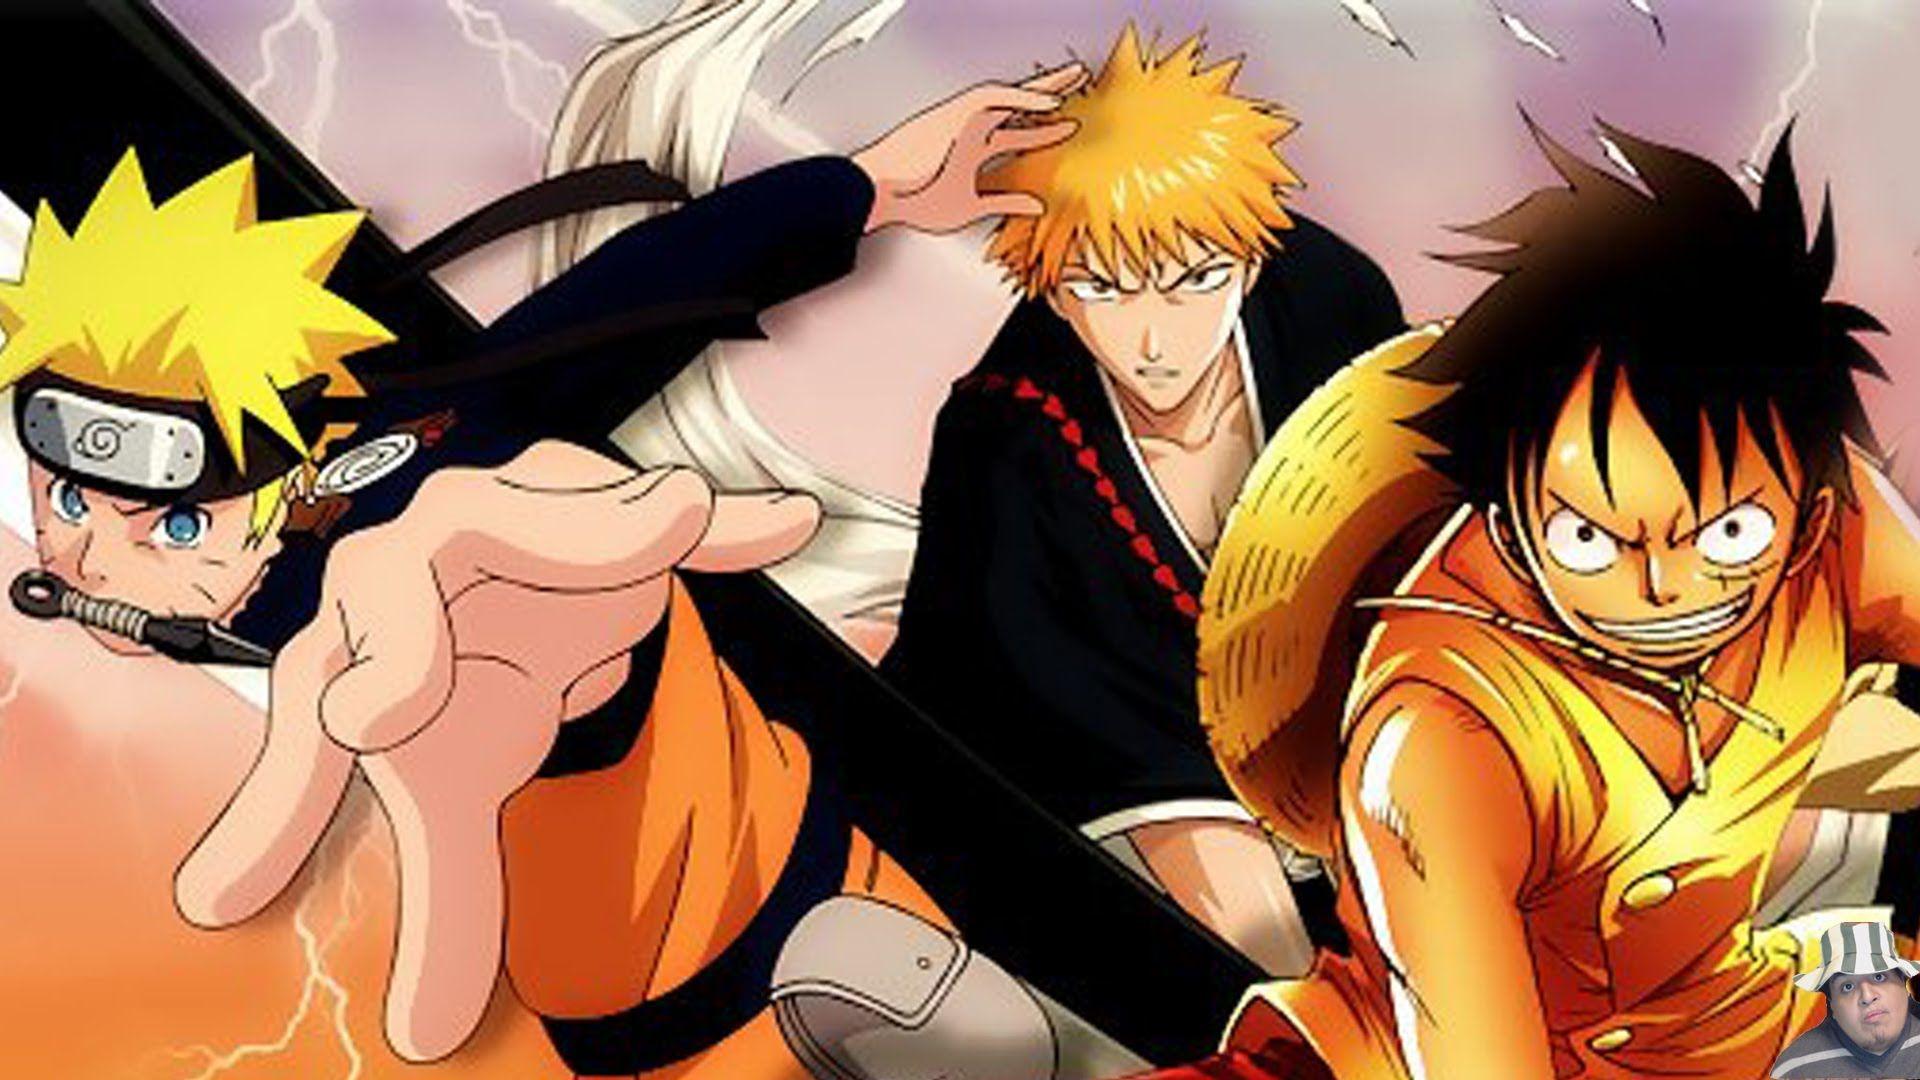 10 similarities the protagonists of the Big 3 Shonen anime share with each  other